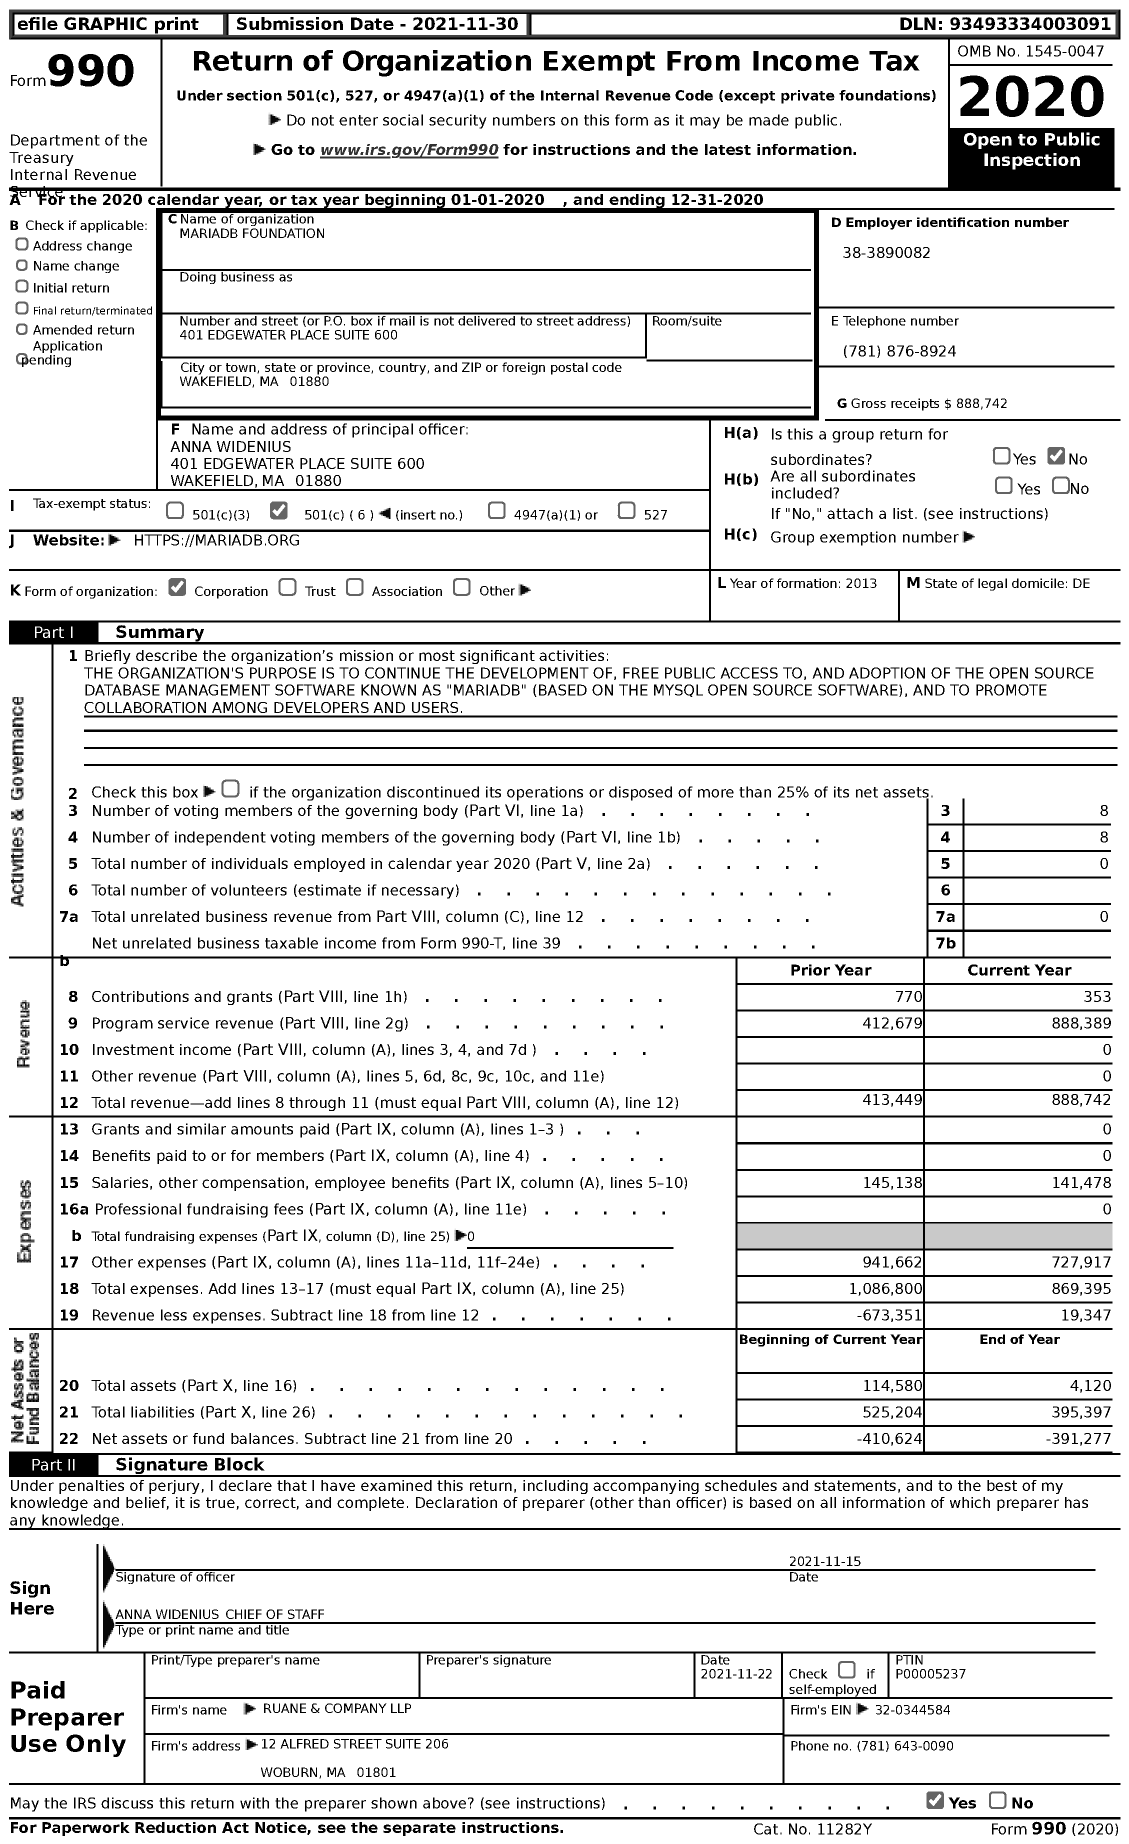 Image of first page of 2020 Form 990 for MariaDB Foundation